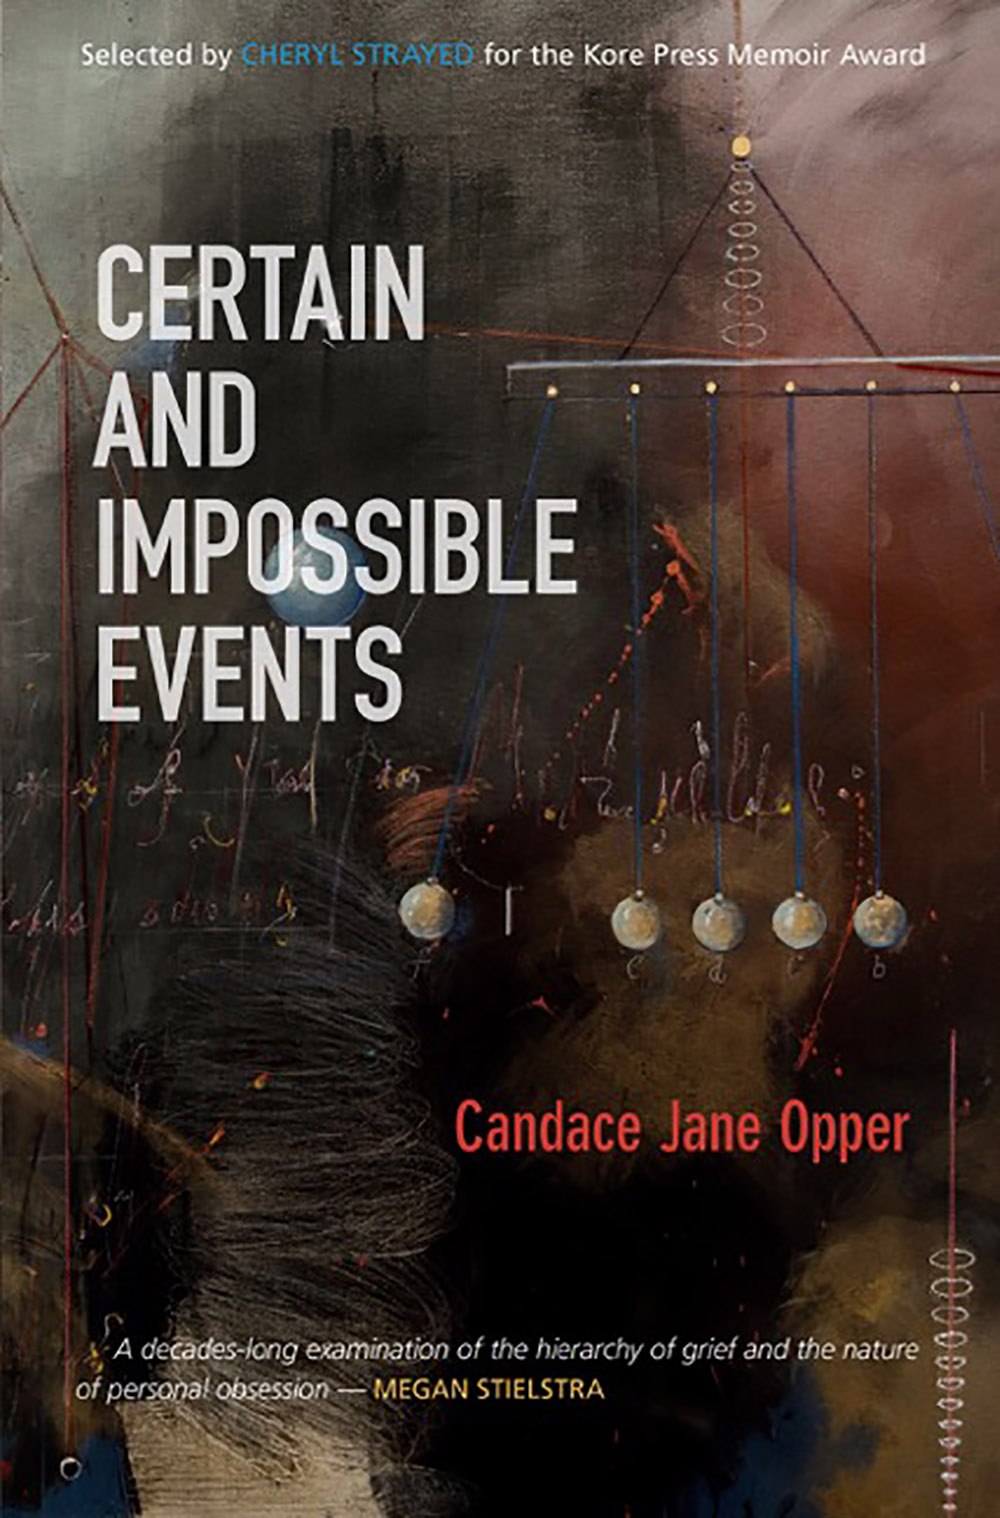 The cover of Certain and Impossible Events